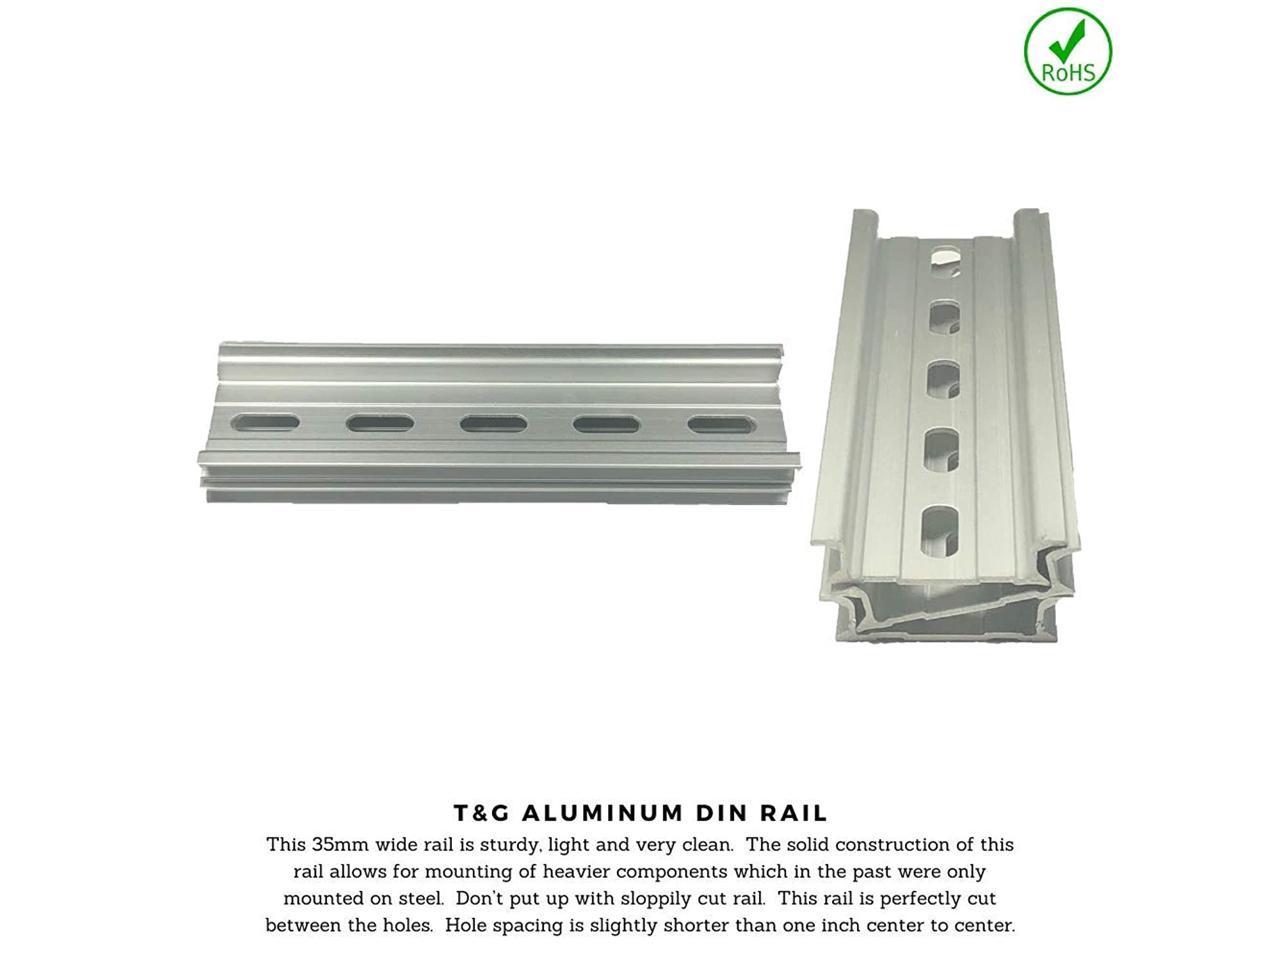 ICI 3 Pieces DIN Rail Slotted Aluminum RoHS 8 Inches Long 35mm Wide 7.5mm High 